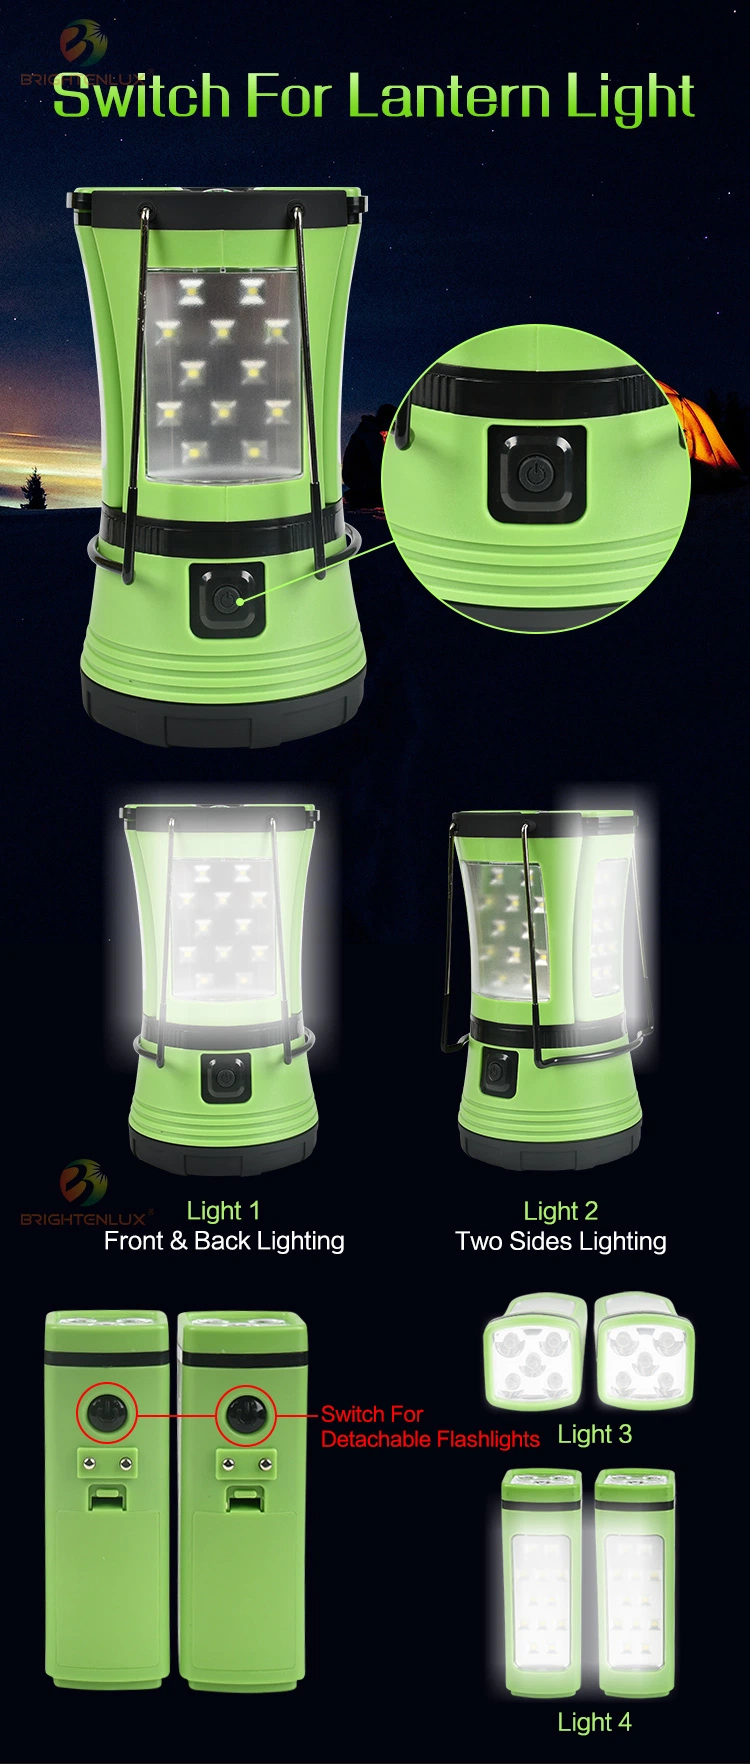 Brightenlux Rechargeable Camping Lantern, Waterproof Portable Plastic Emergency Outdoor Rechargeable LED Camping LED Lamp Lantern Lights